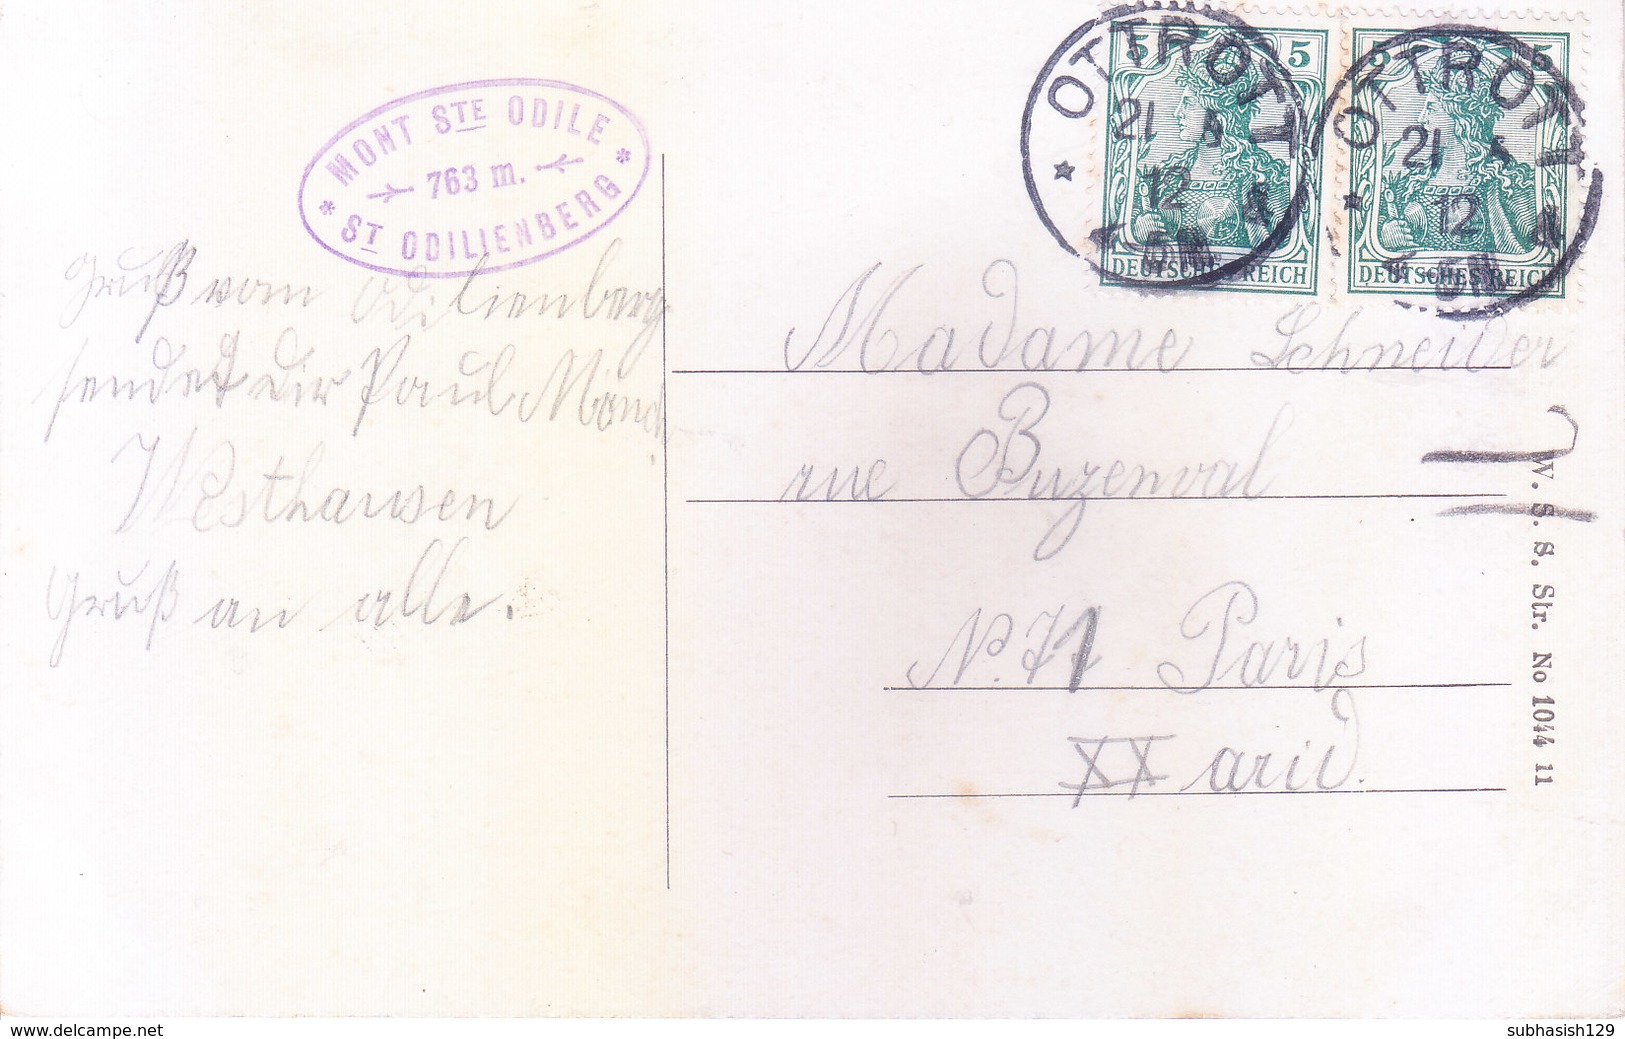 GERMANY, REICH : BLACK & WHITE PICTURE POST CARD : BOOKED FROM OTTROTT IN 1912 FOR FRANCE : ODILIENGERG - Covers & Documents